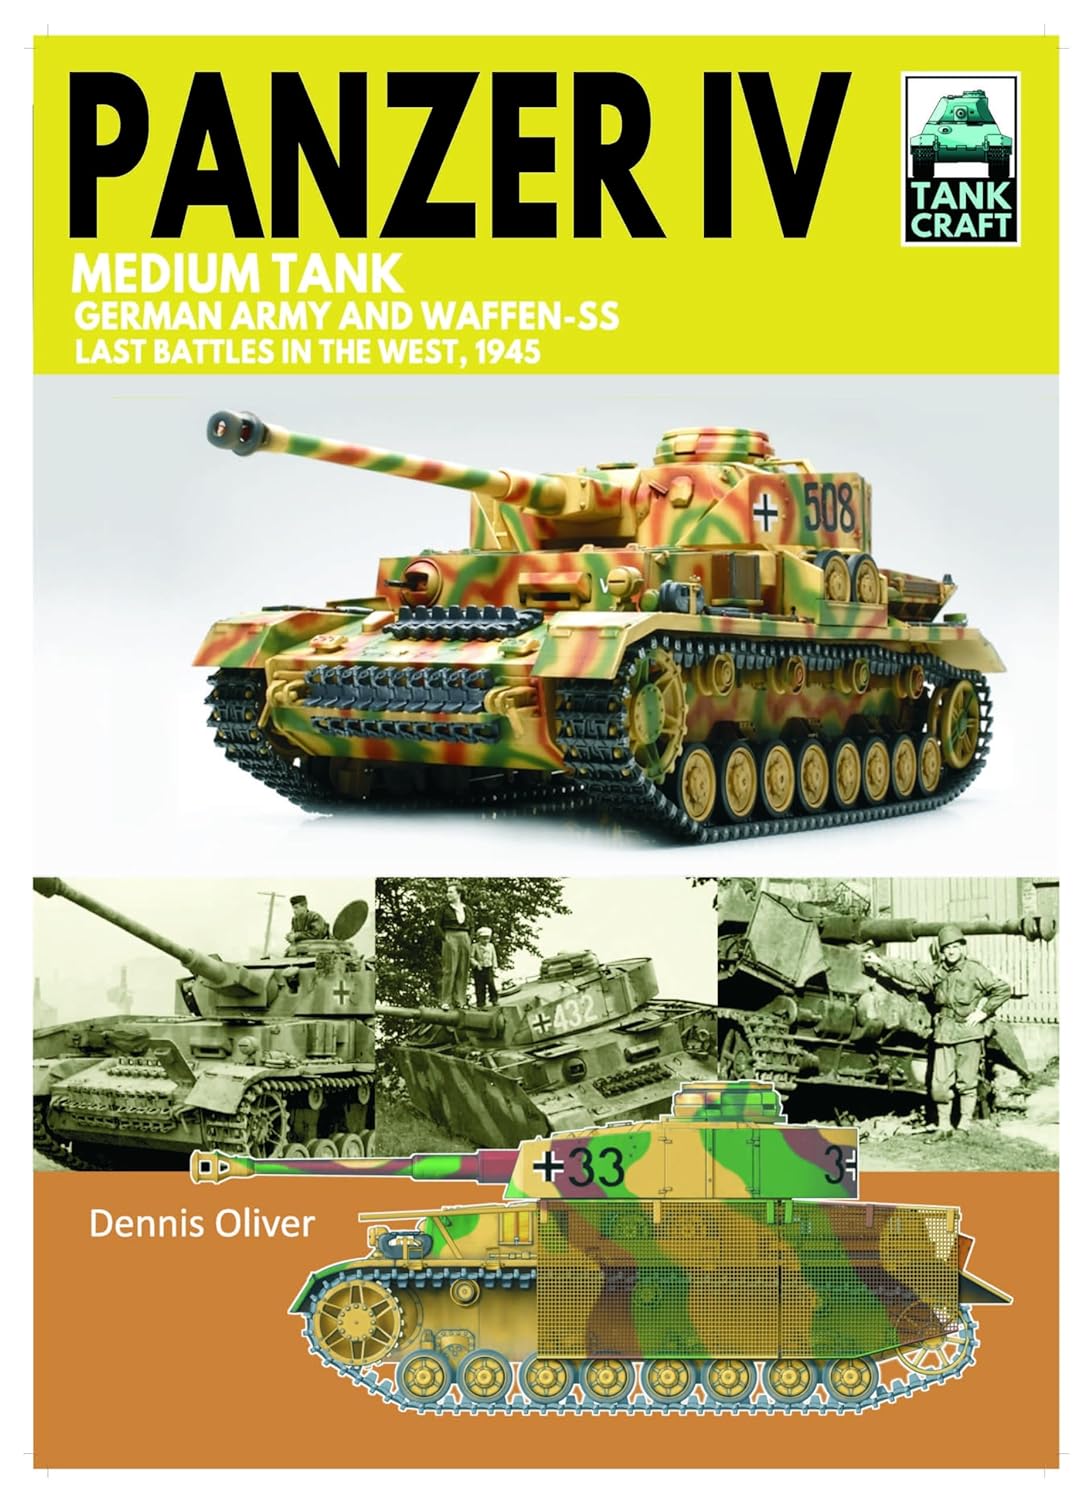 Panzer IV Medium Tank: German Army and Waffen-SS Last battles in the West, 1945